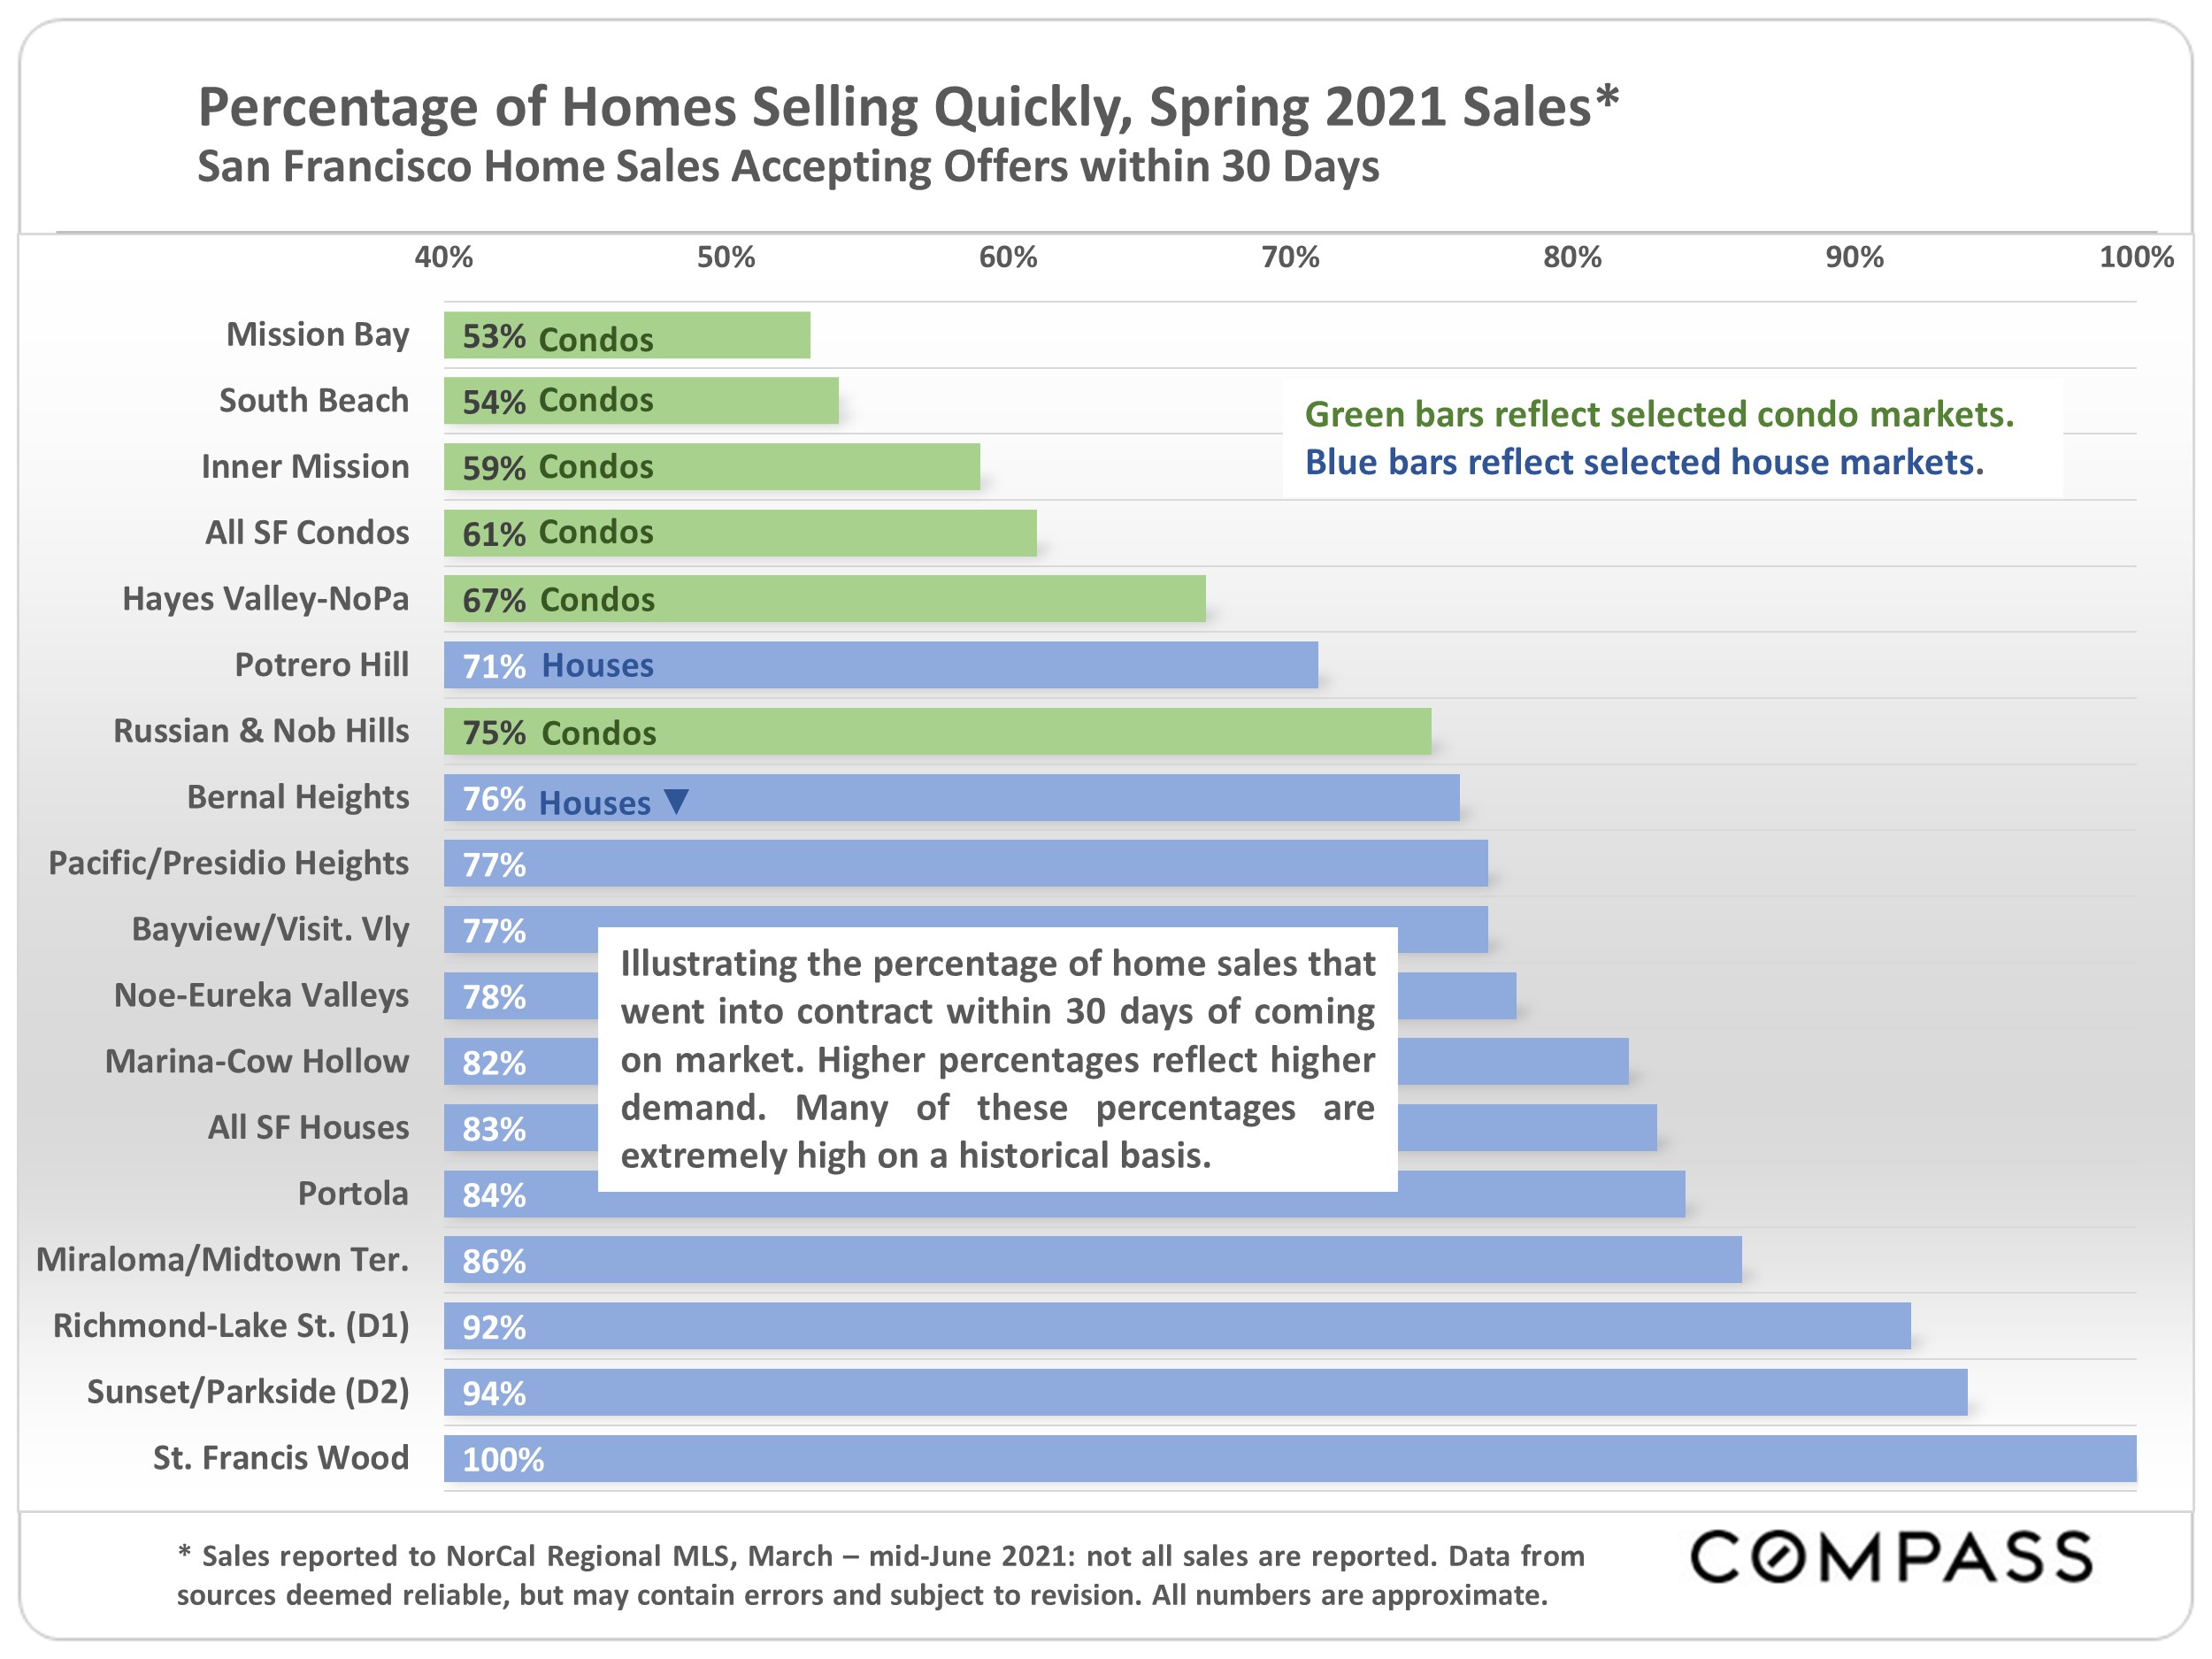 Graph showing the percentage of homes selling quickly, spring 2021; San Francisco home sales accepting offers within 30 days for selected house and condo markets as of Jun 2021